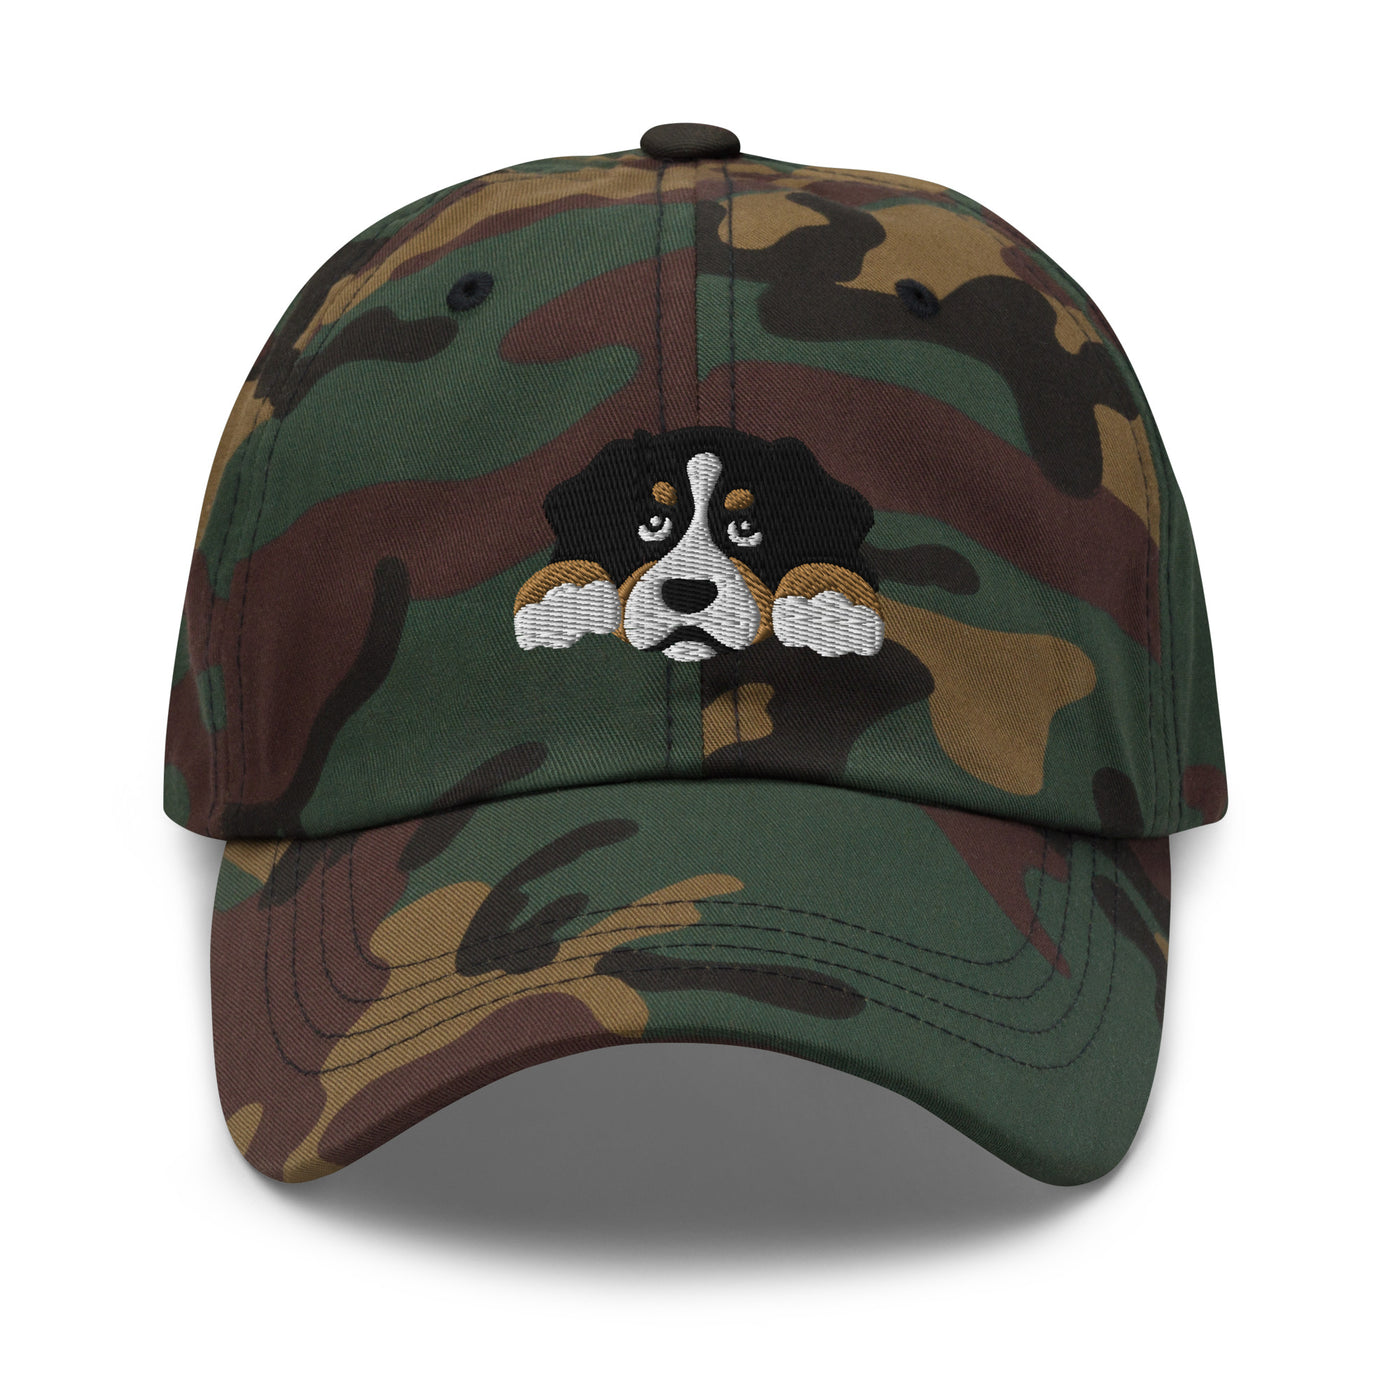 Bernese mountain dog embroidered hat